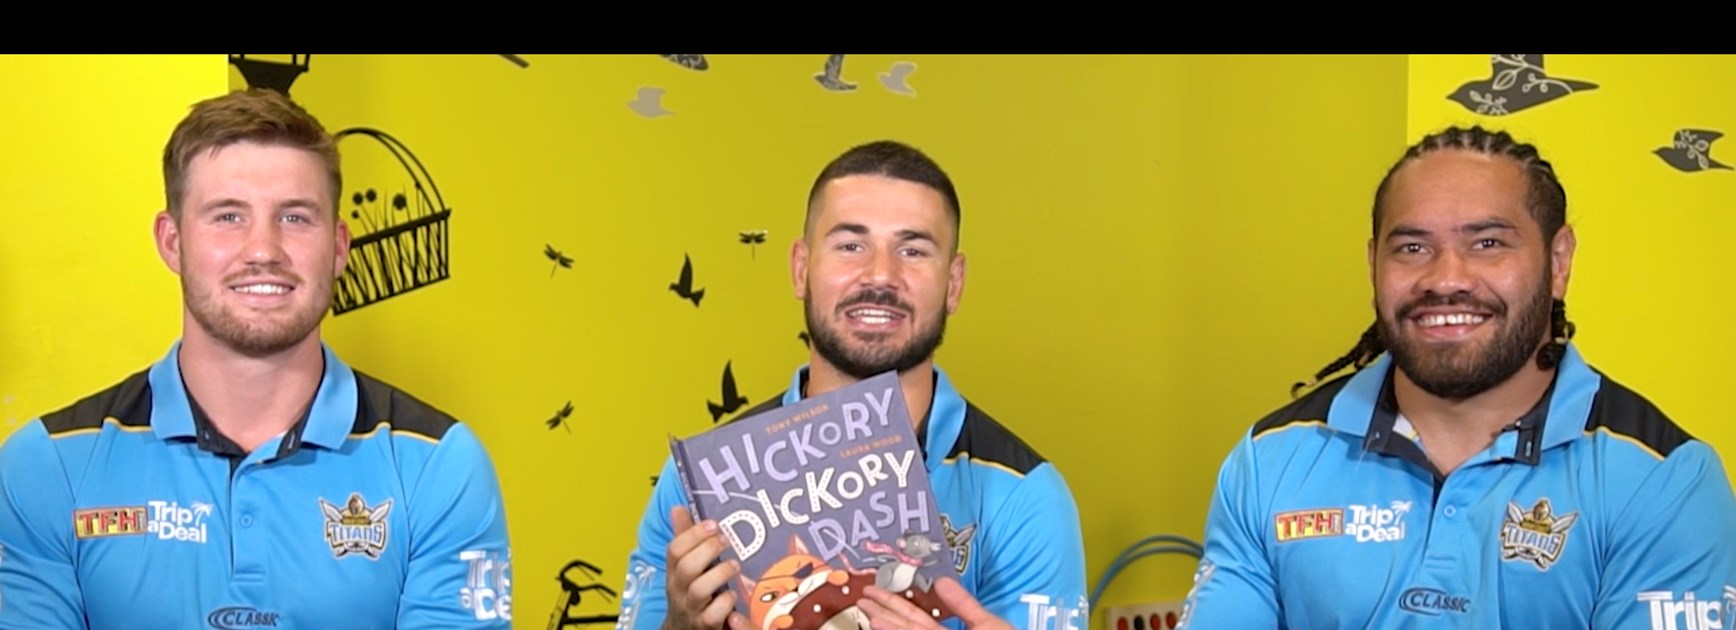 VIDEO: National Simultaneous Storytime